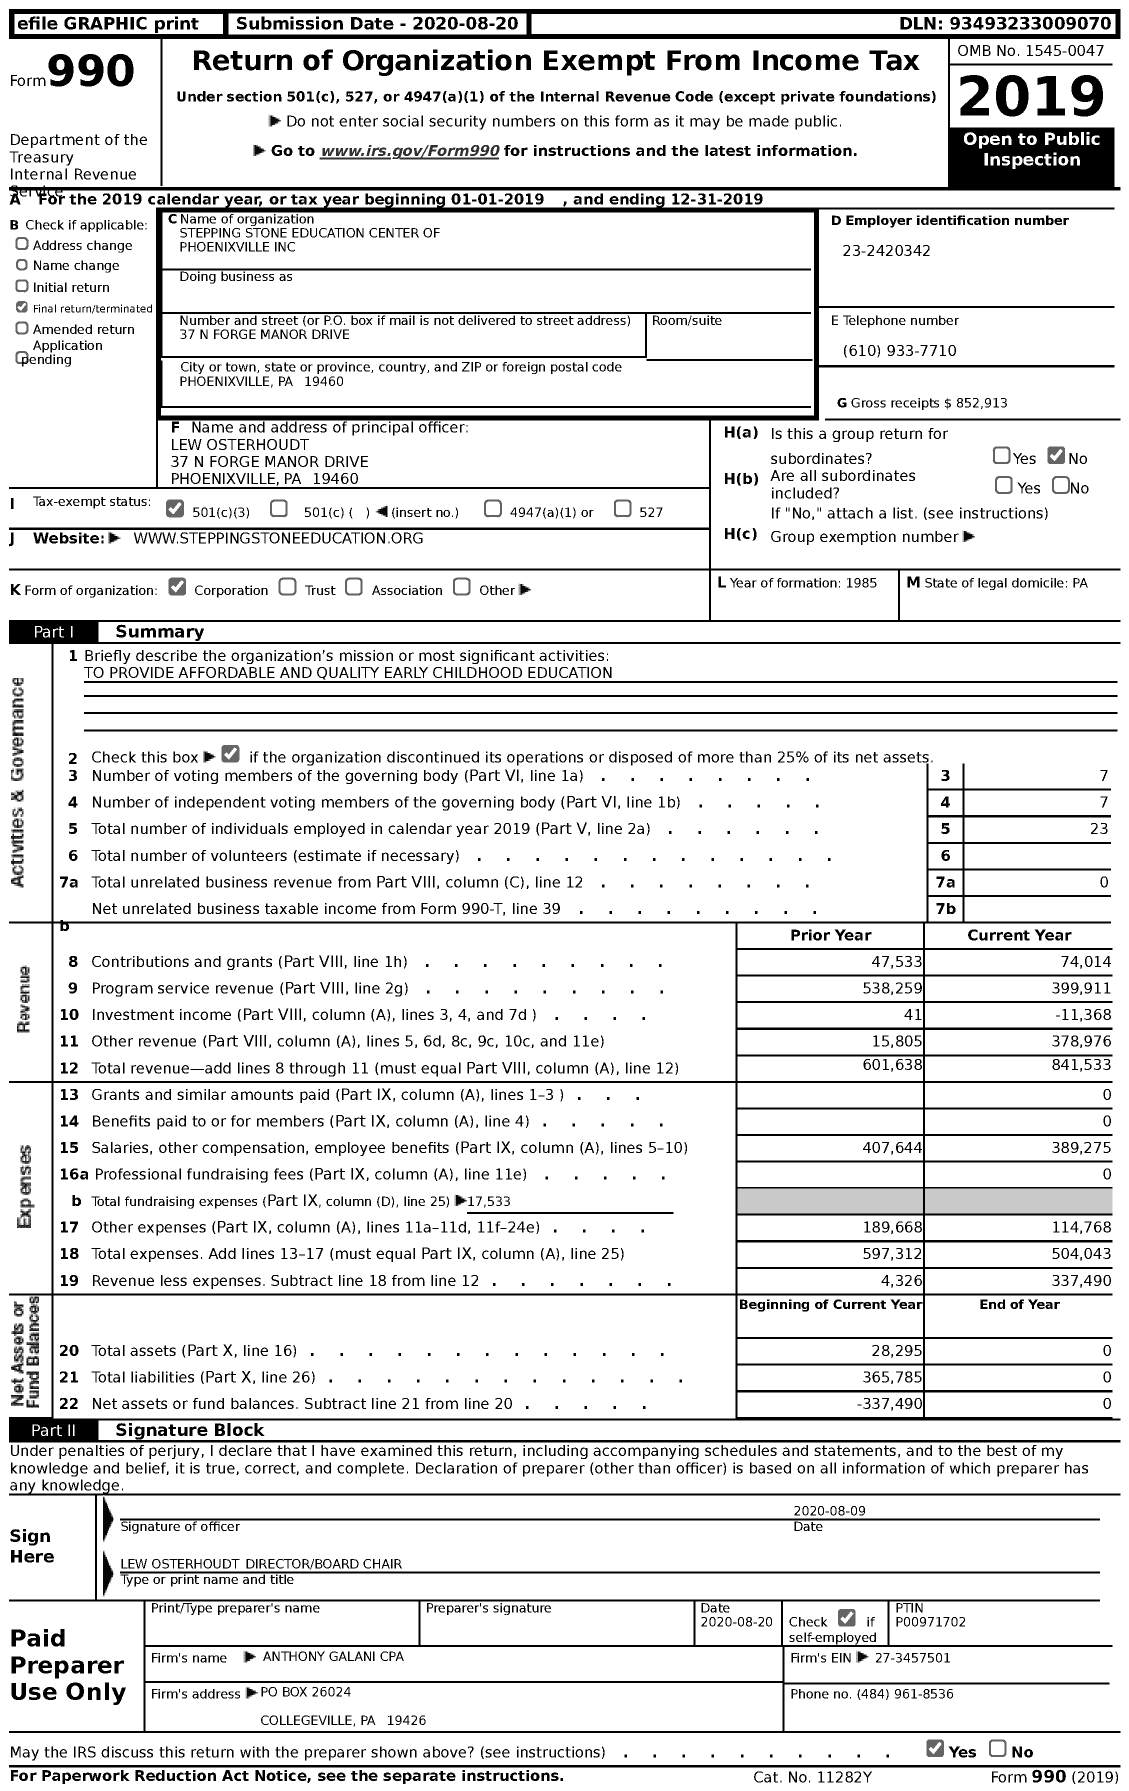 Image of first page of 2019 Form 990 for Stepping Stone Education Center of Phoenixville